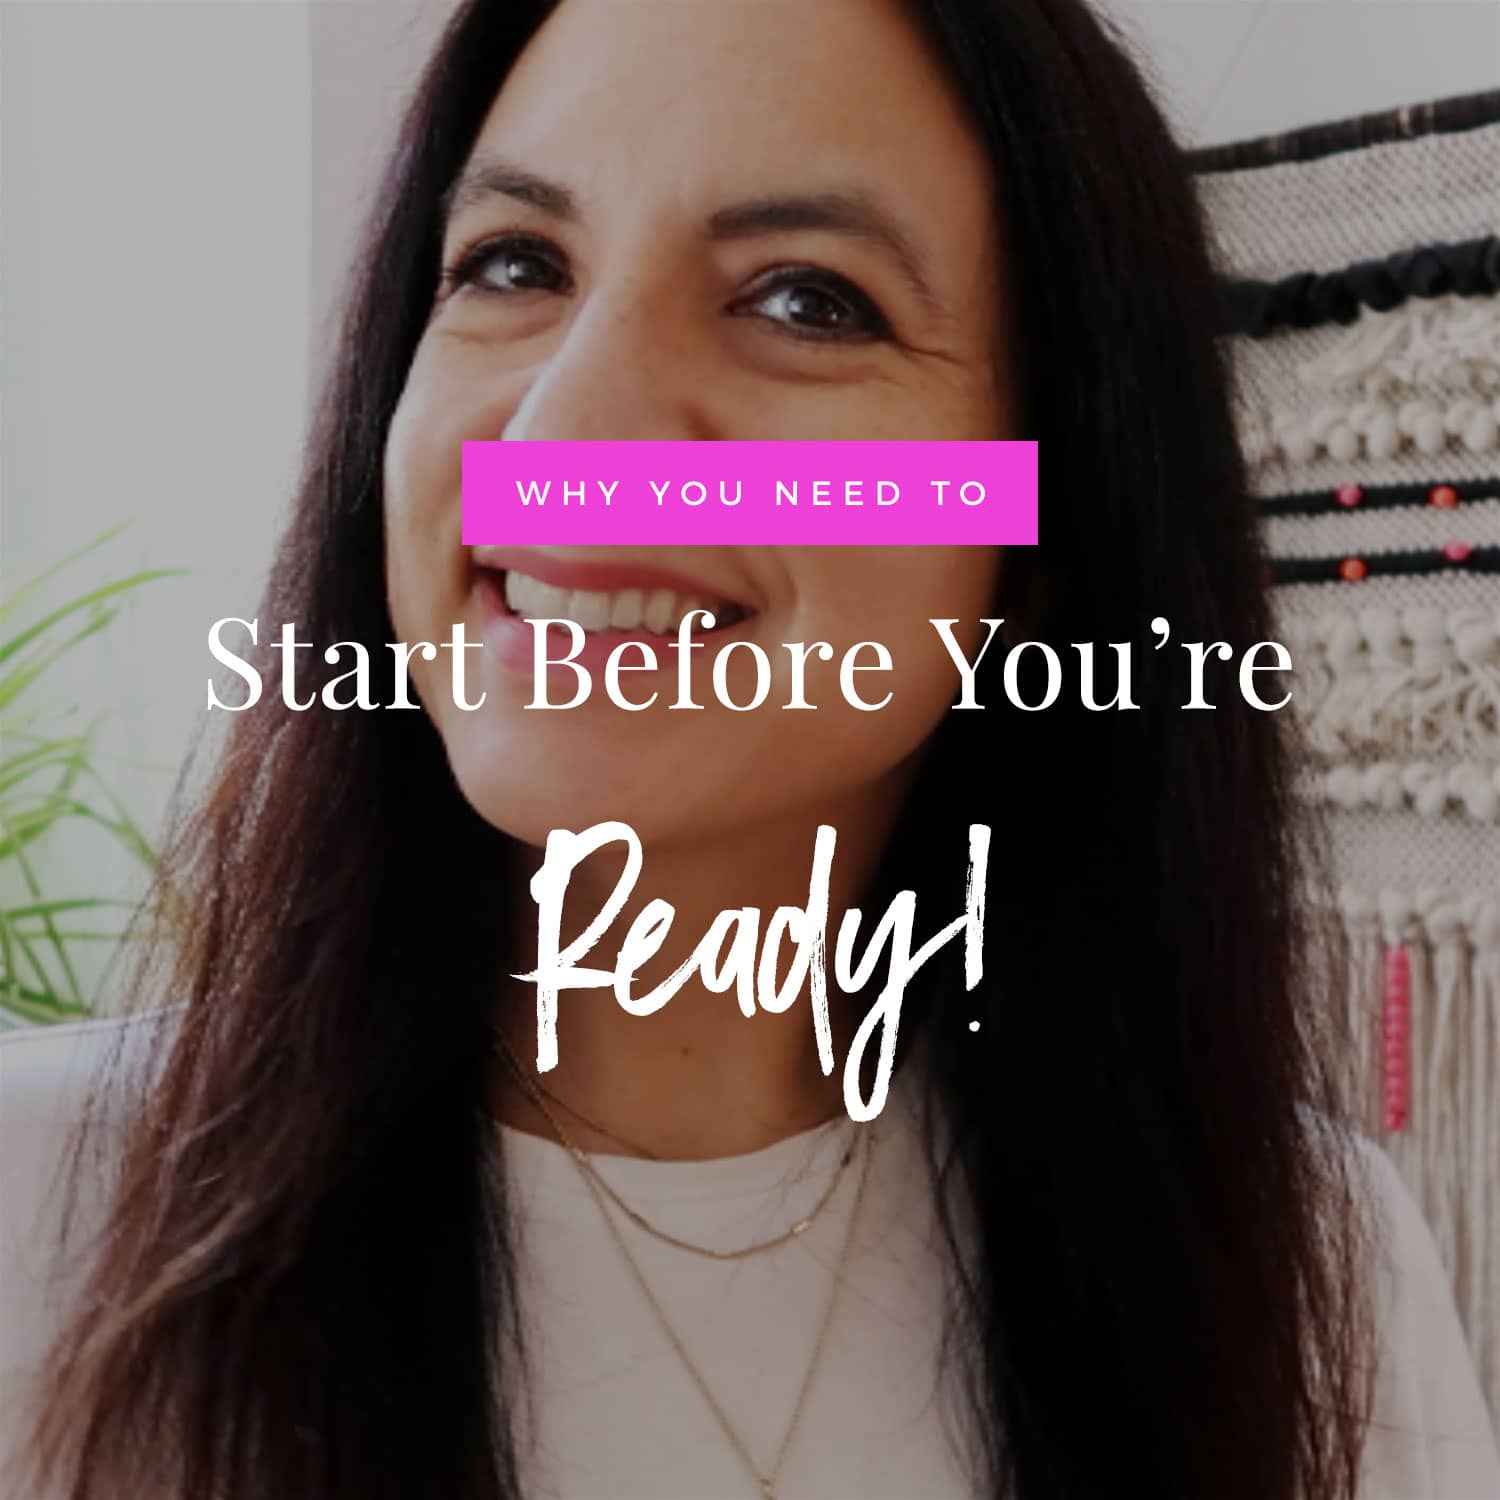 Why You Need To Start Before You're Ready